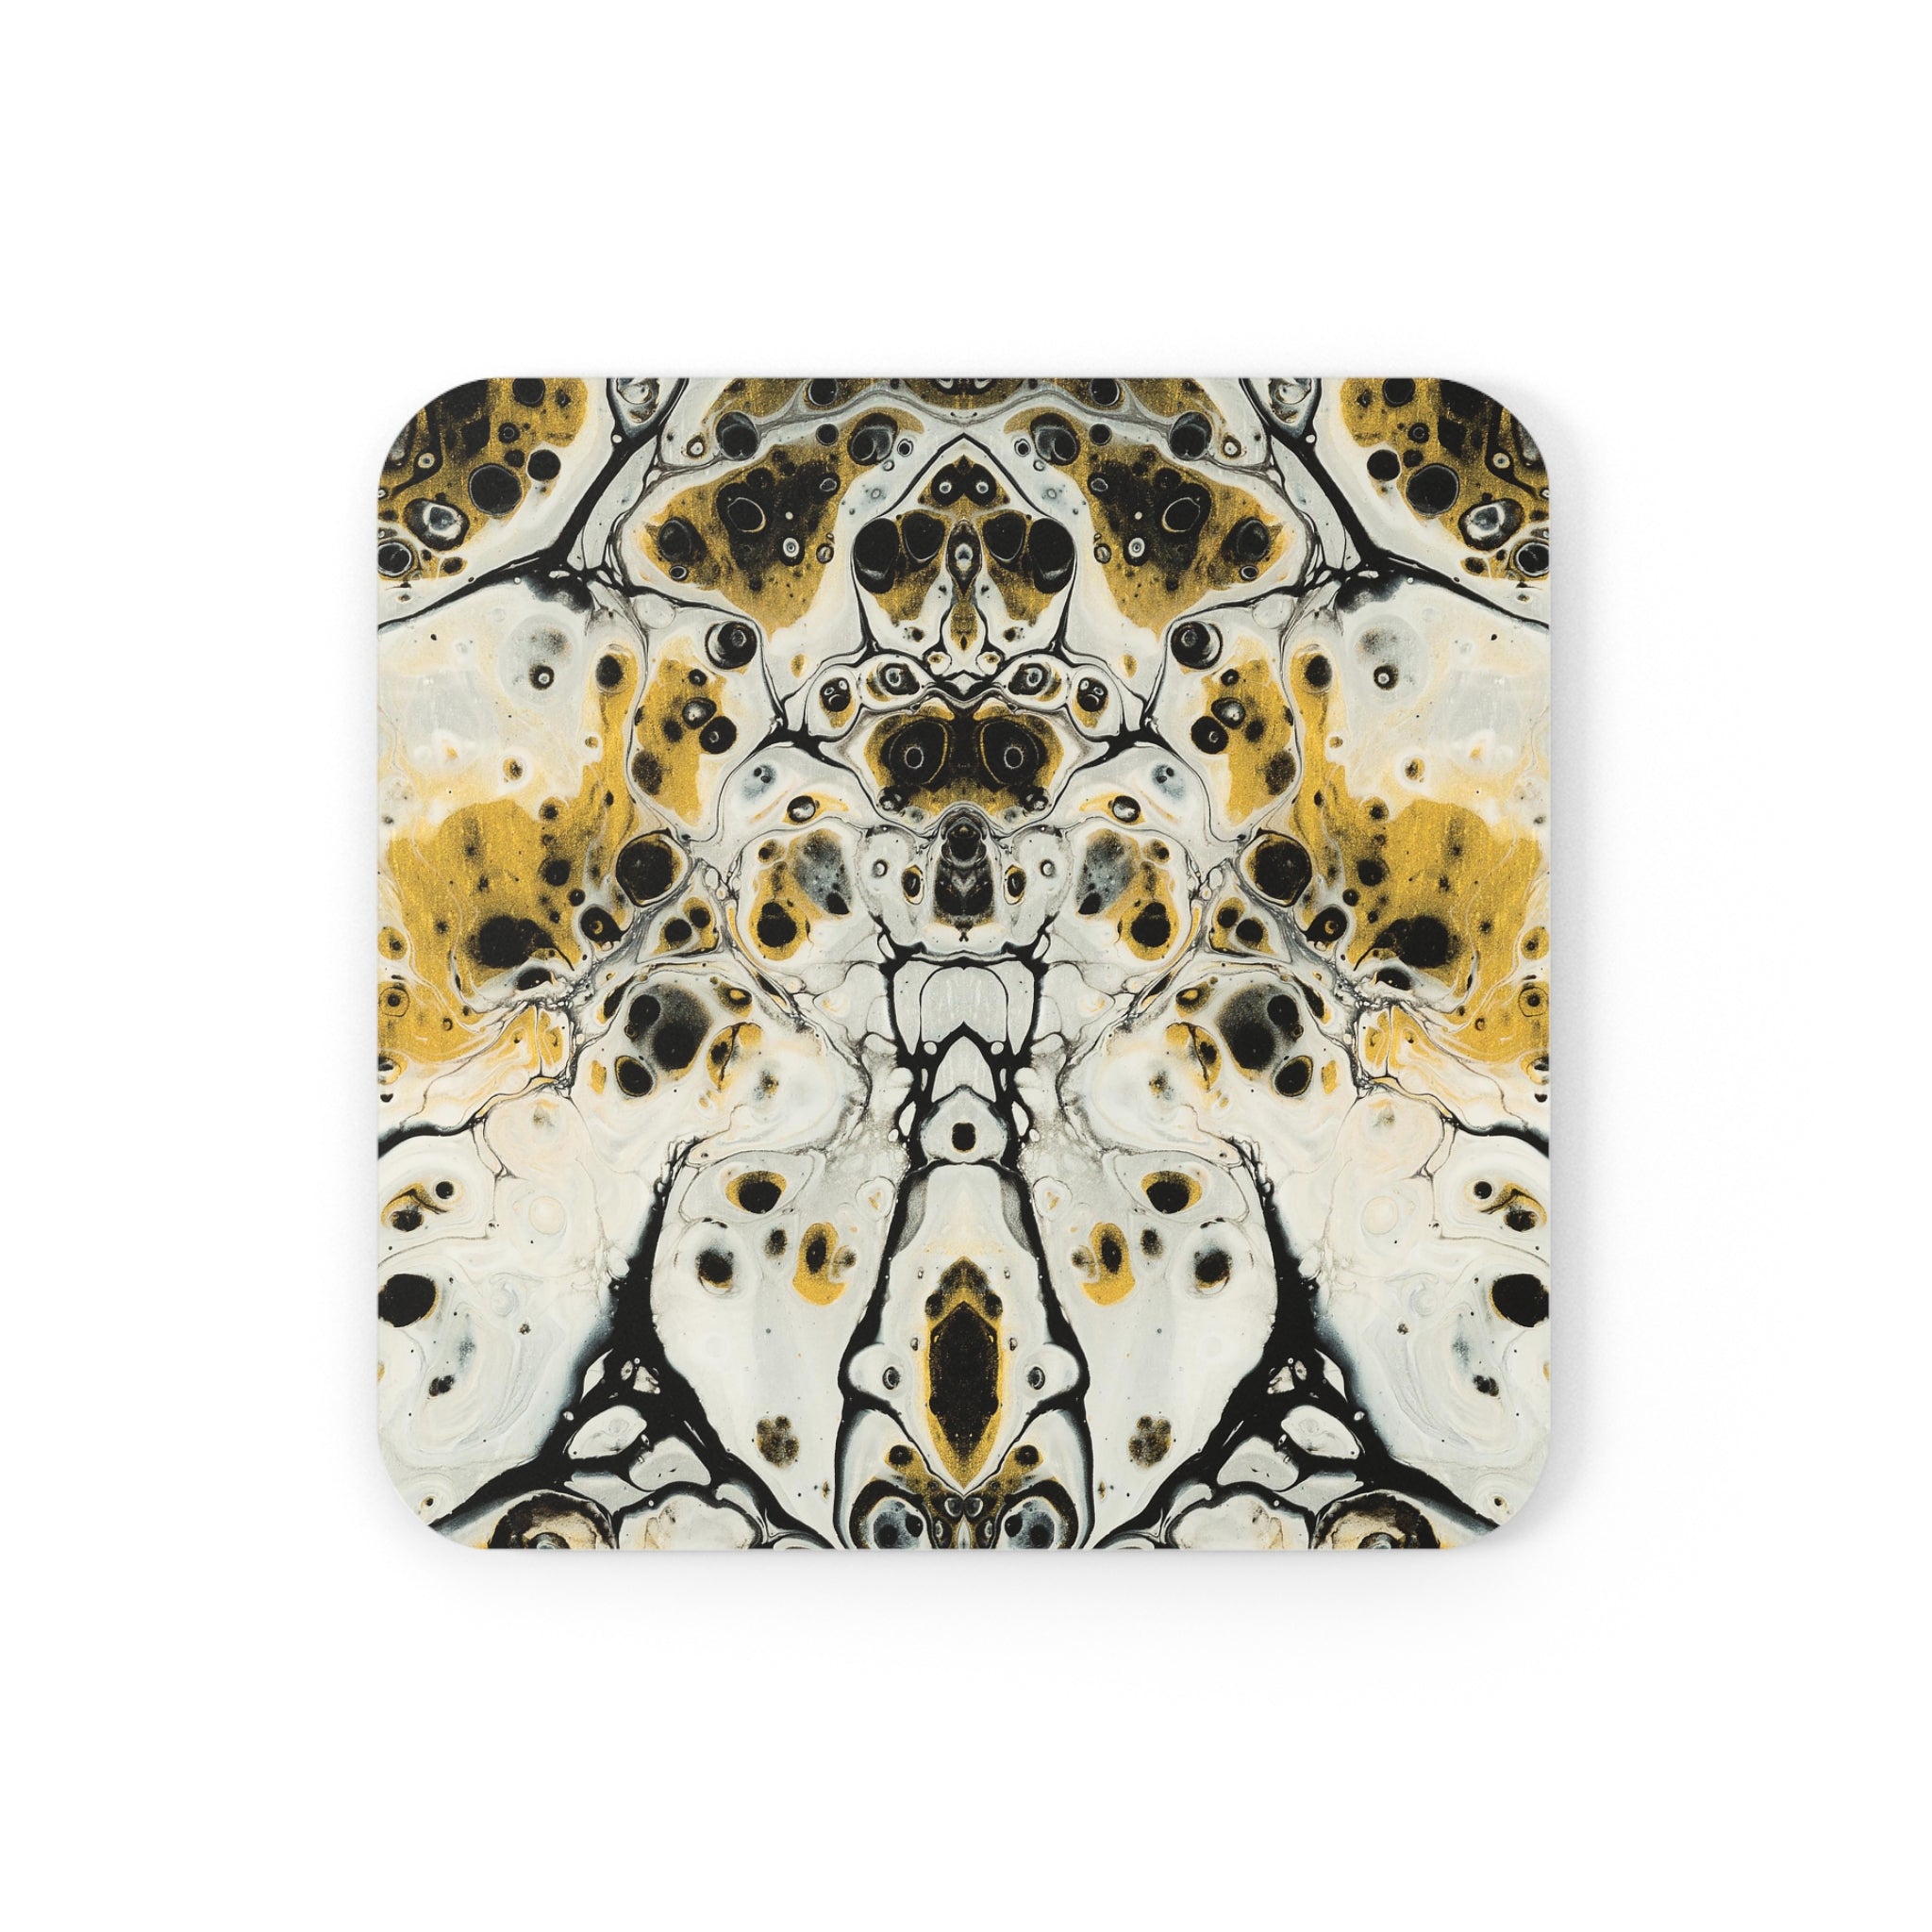 Cameron Creations - Golden Ghosts - Stylish Coffee Coaster - Square Front